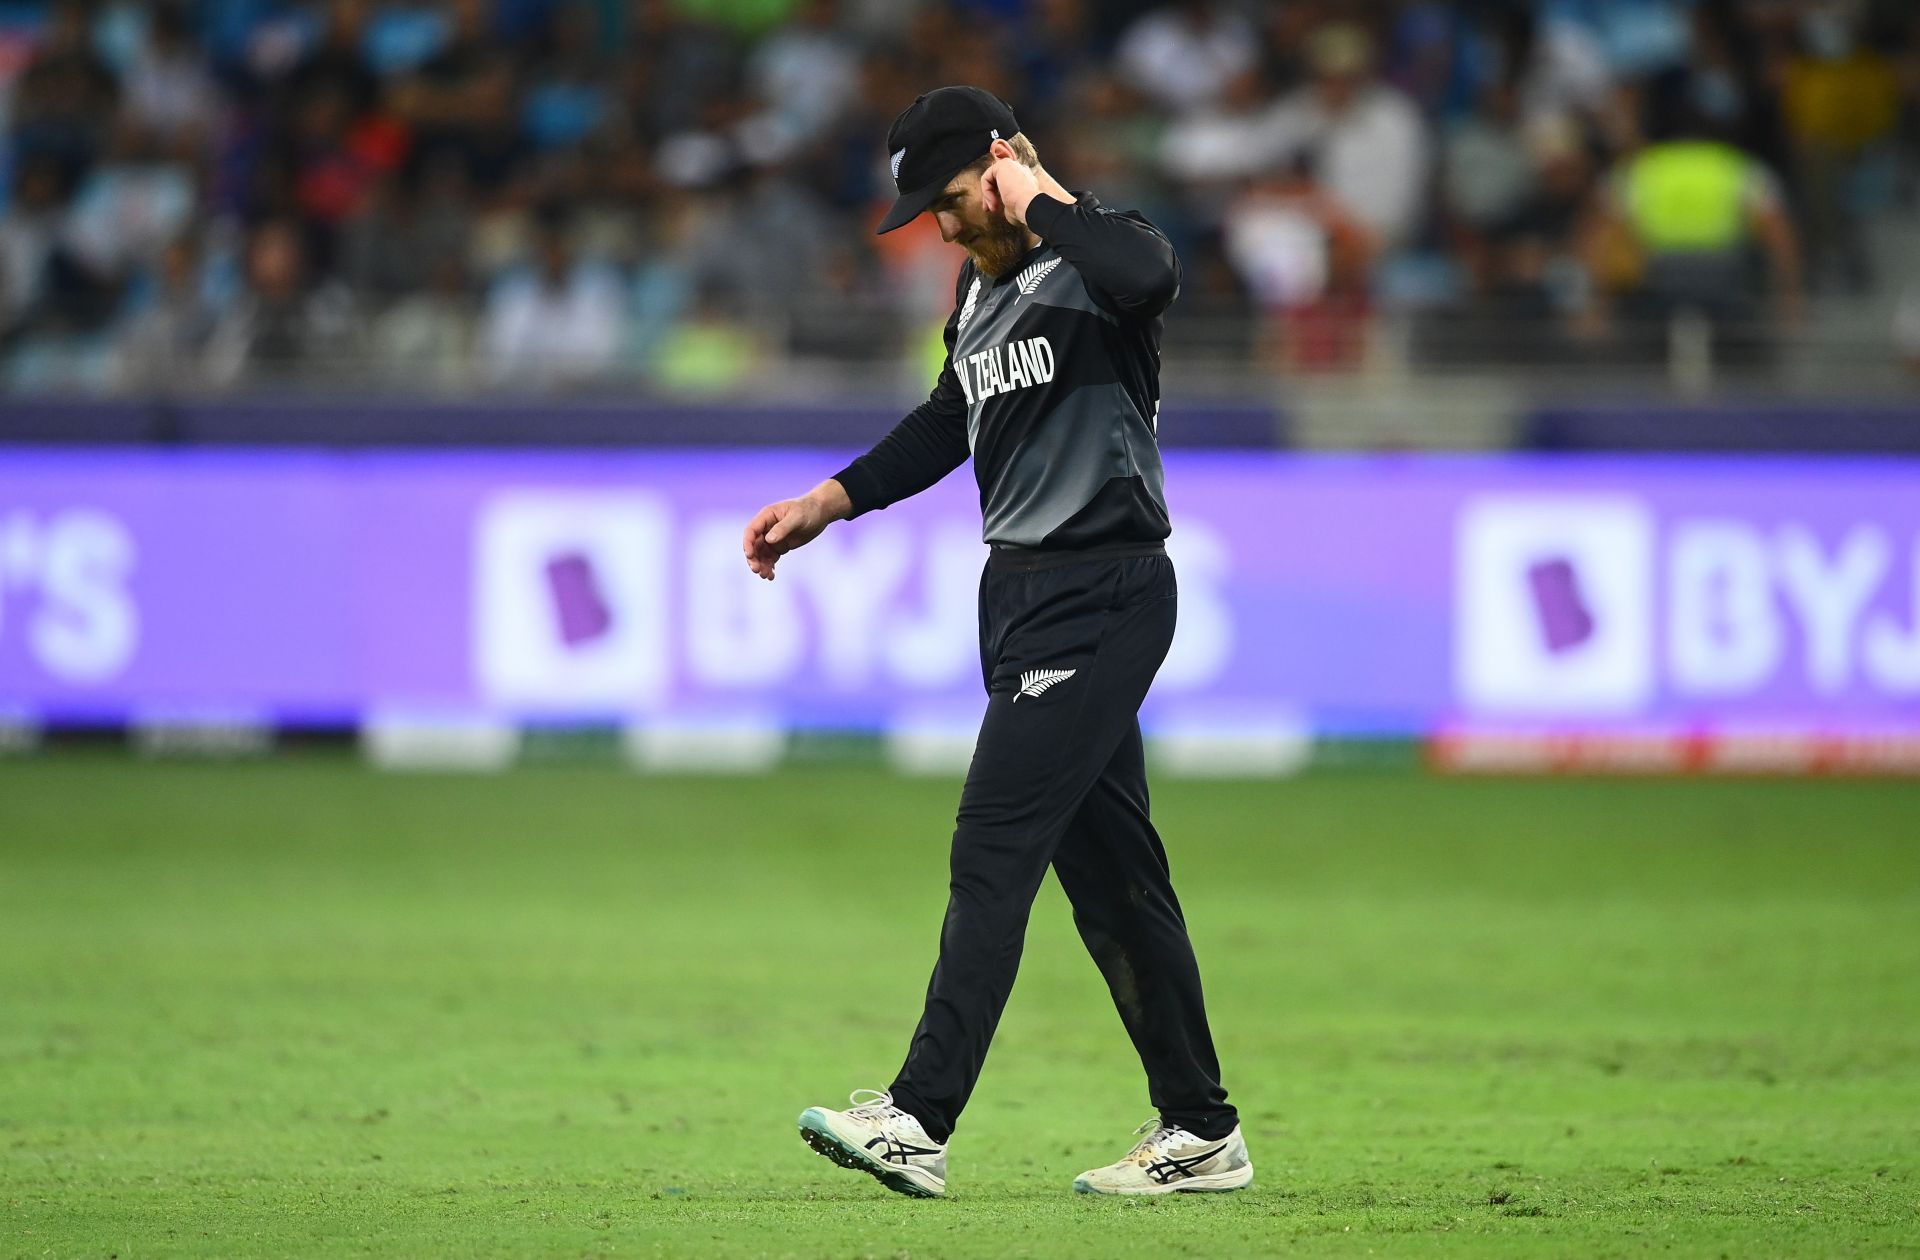 Can Kane Williamson turn on the style in IPL 2022?